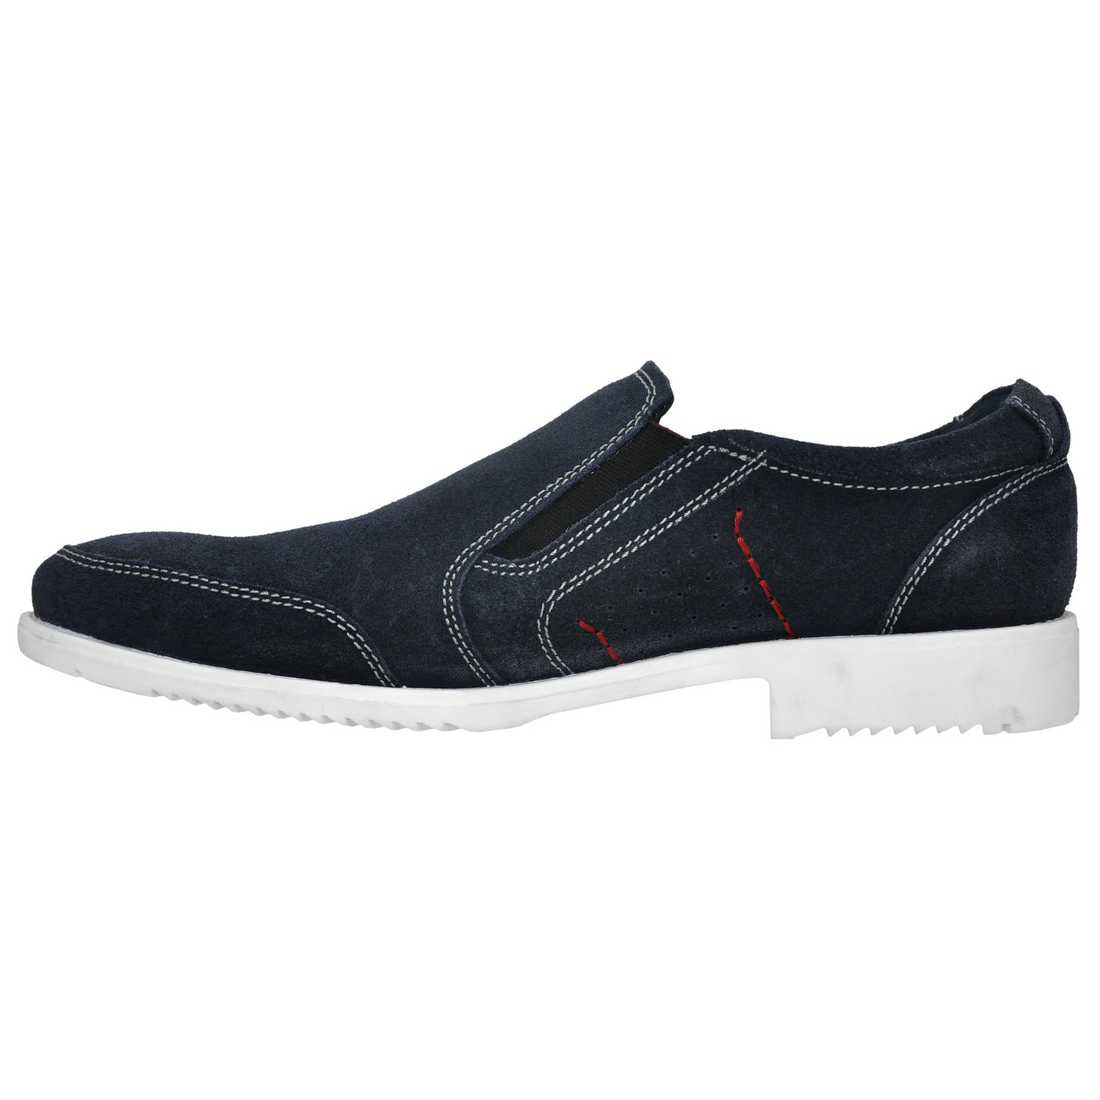 OHM New York American Lifestyle Vamp Stitched Leather Slip-on Shoes